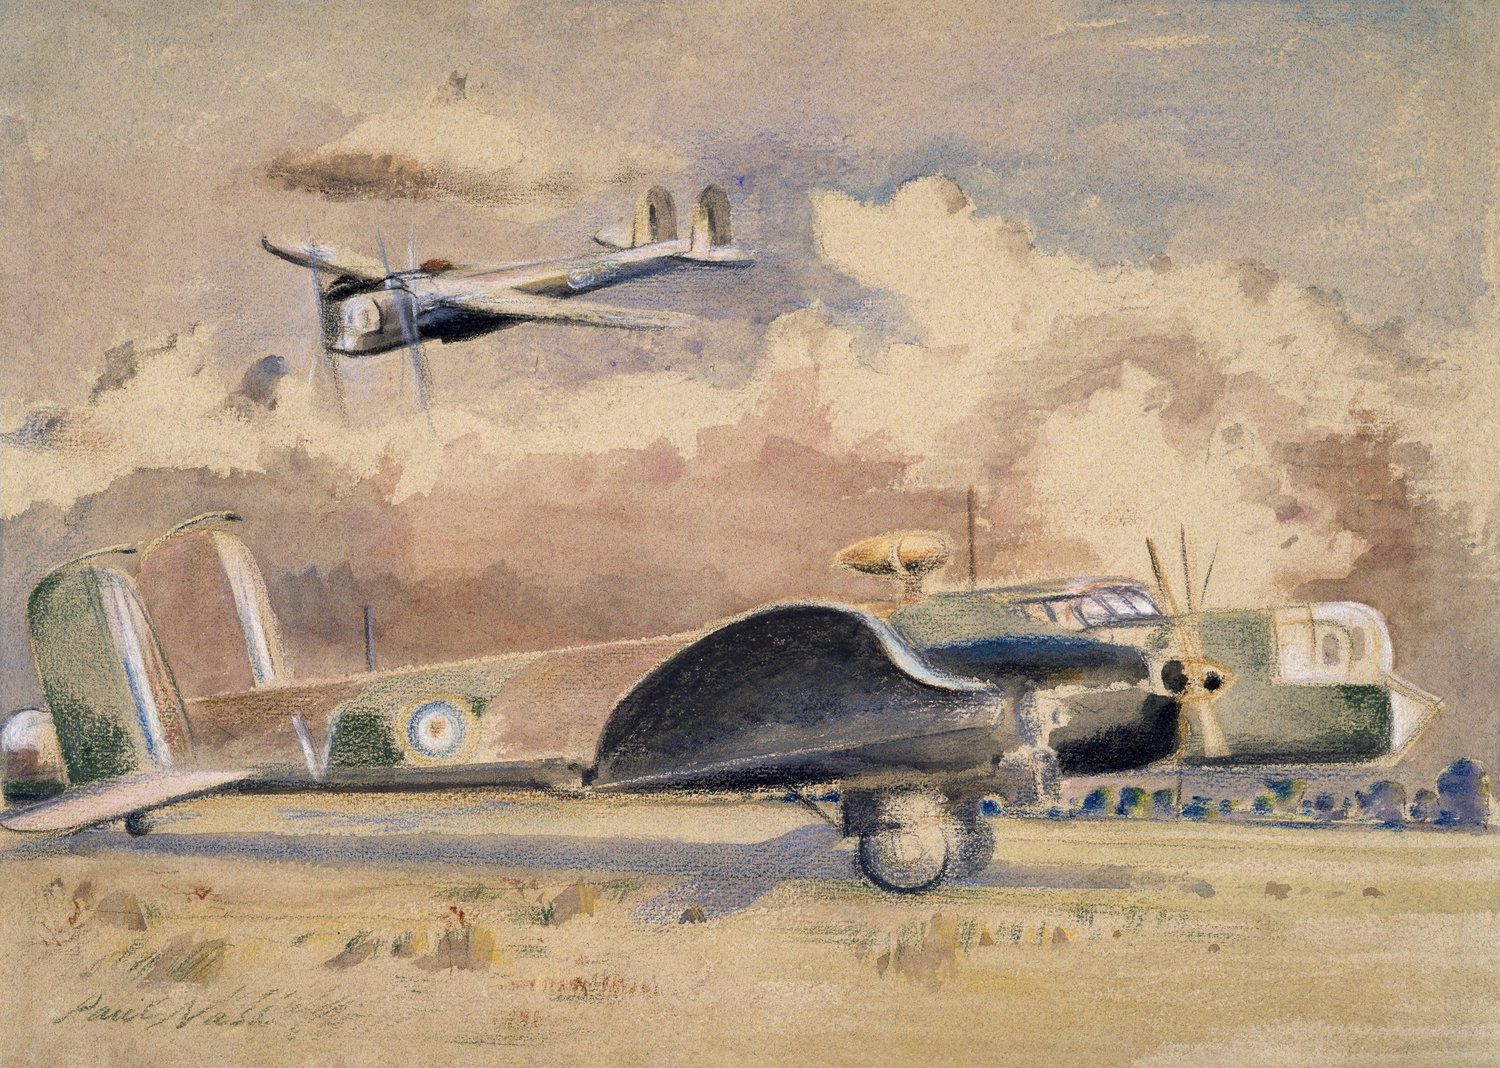 Whitley Bombers Sunning (1940)